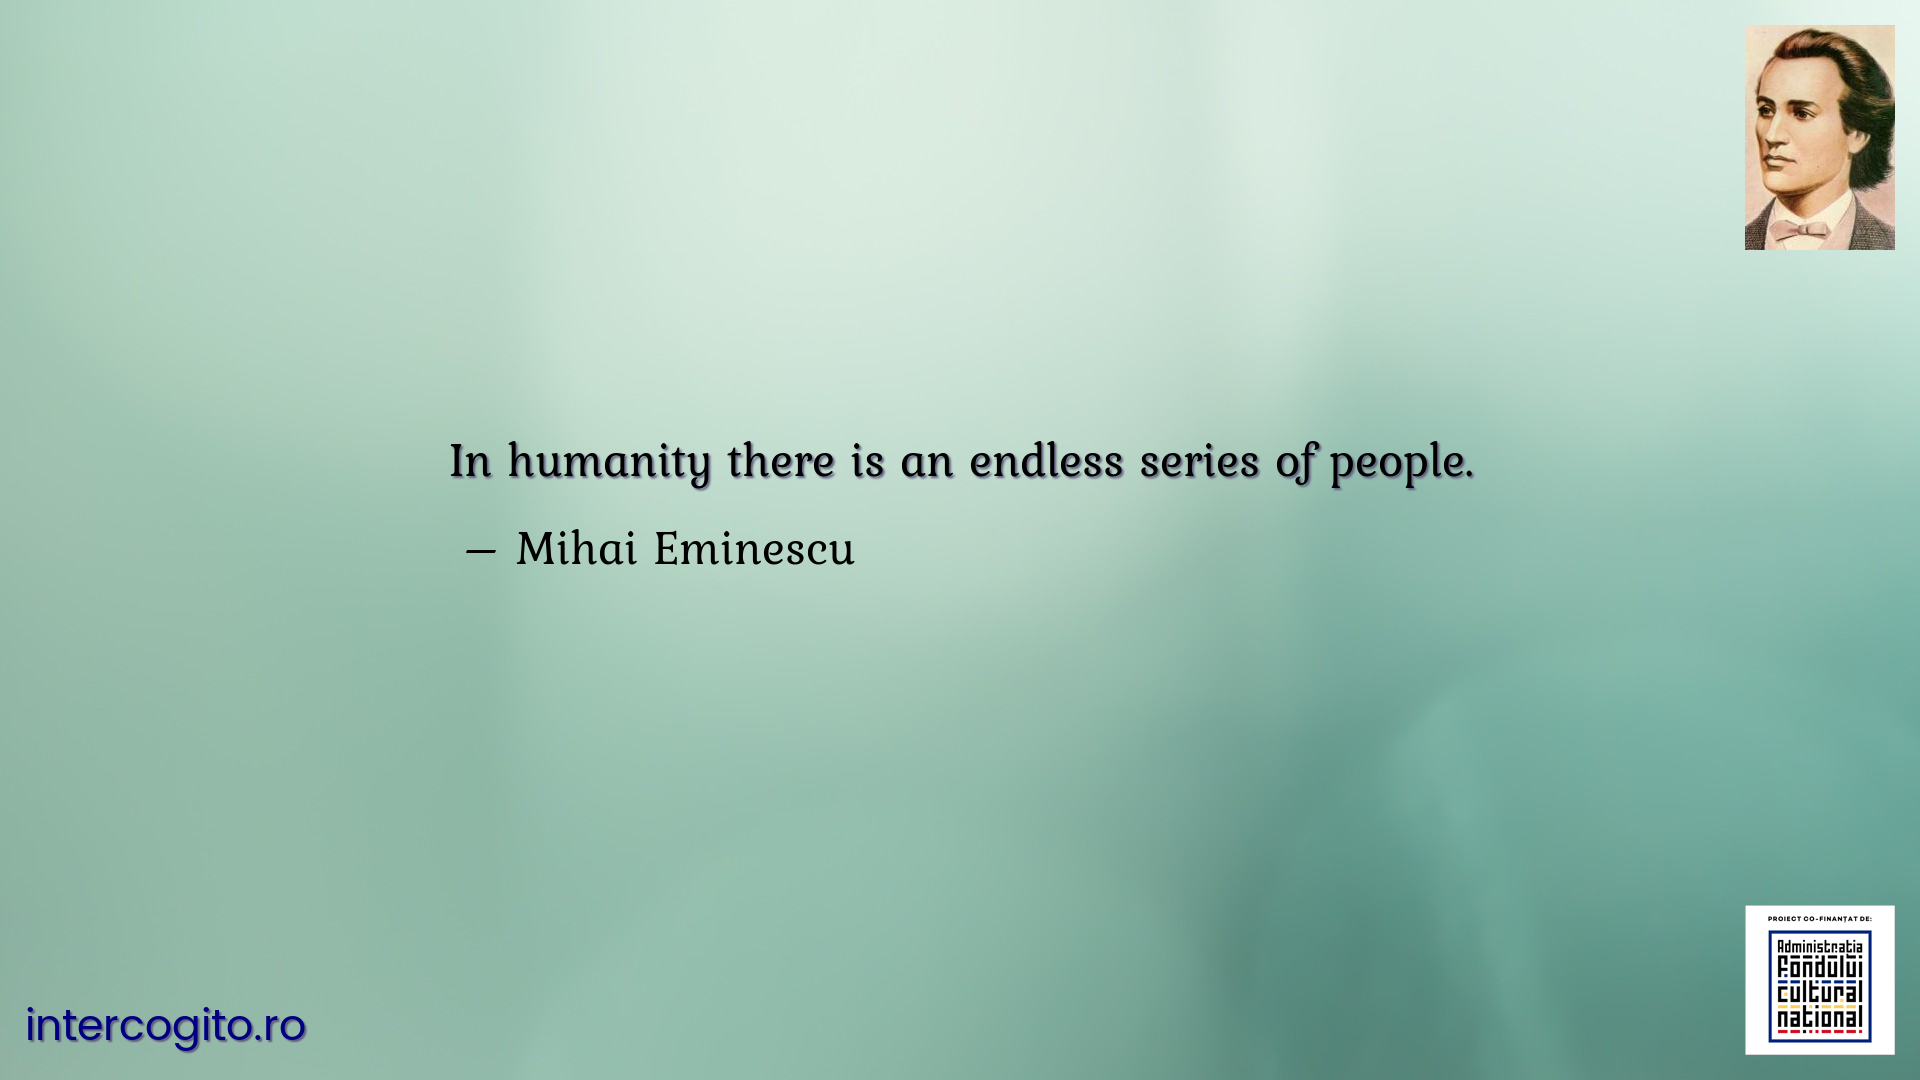 In humanity there is an endless series of people.